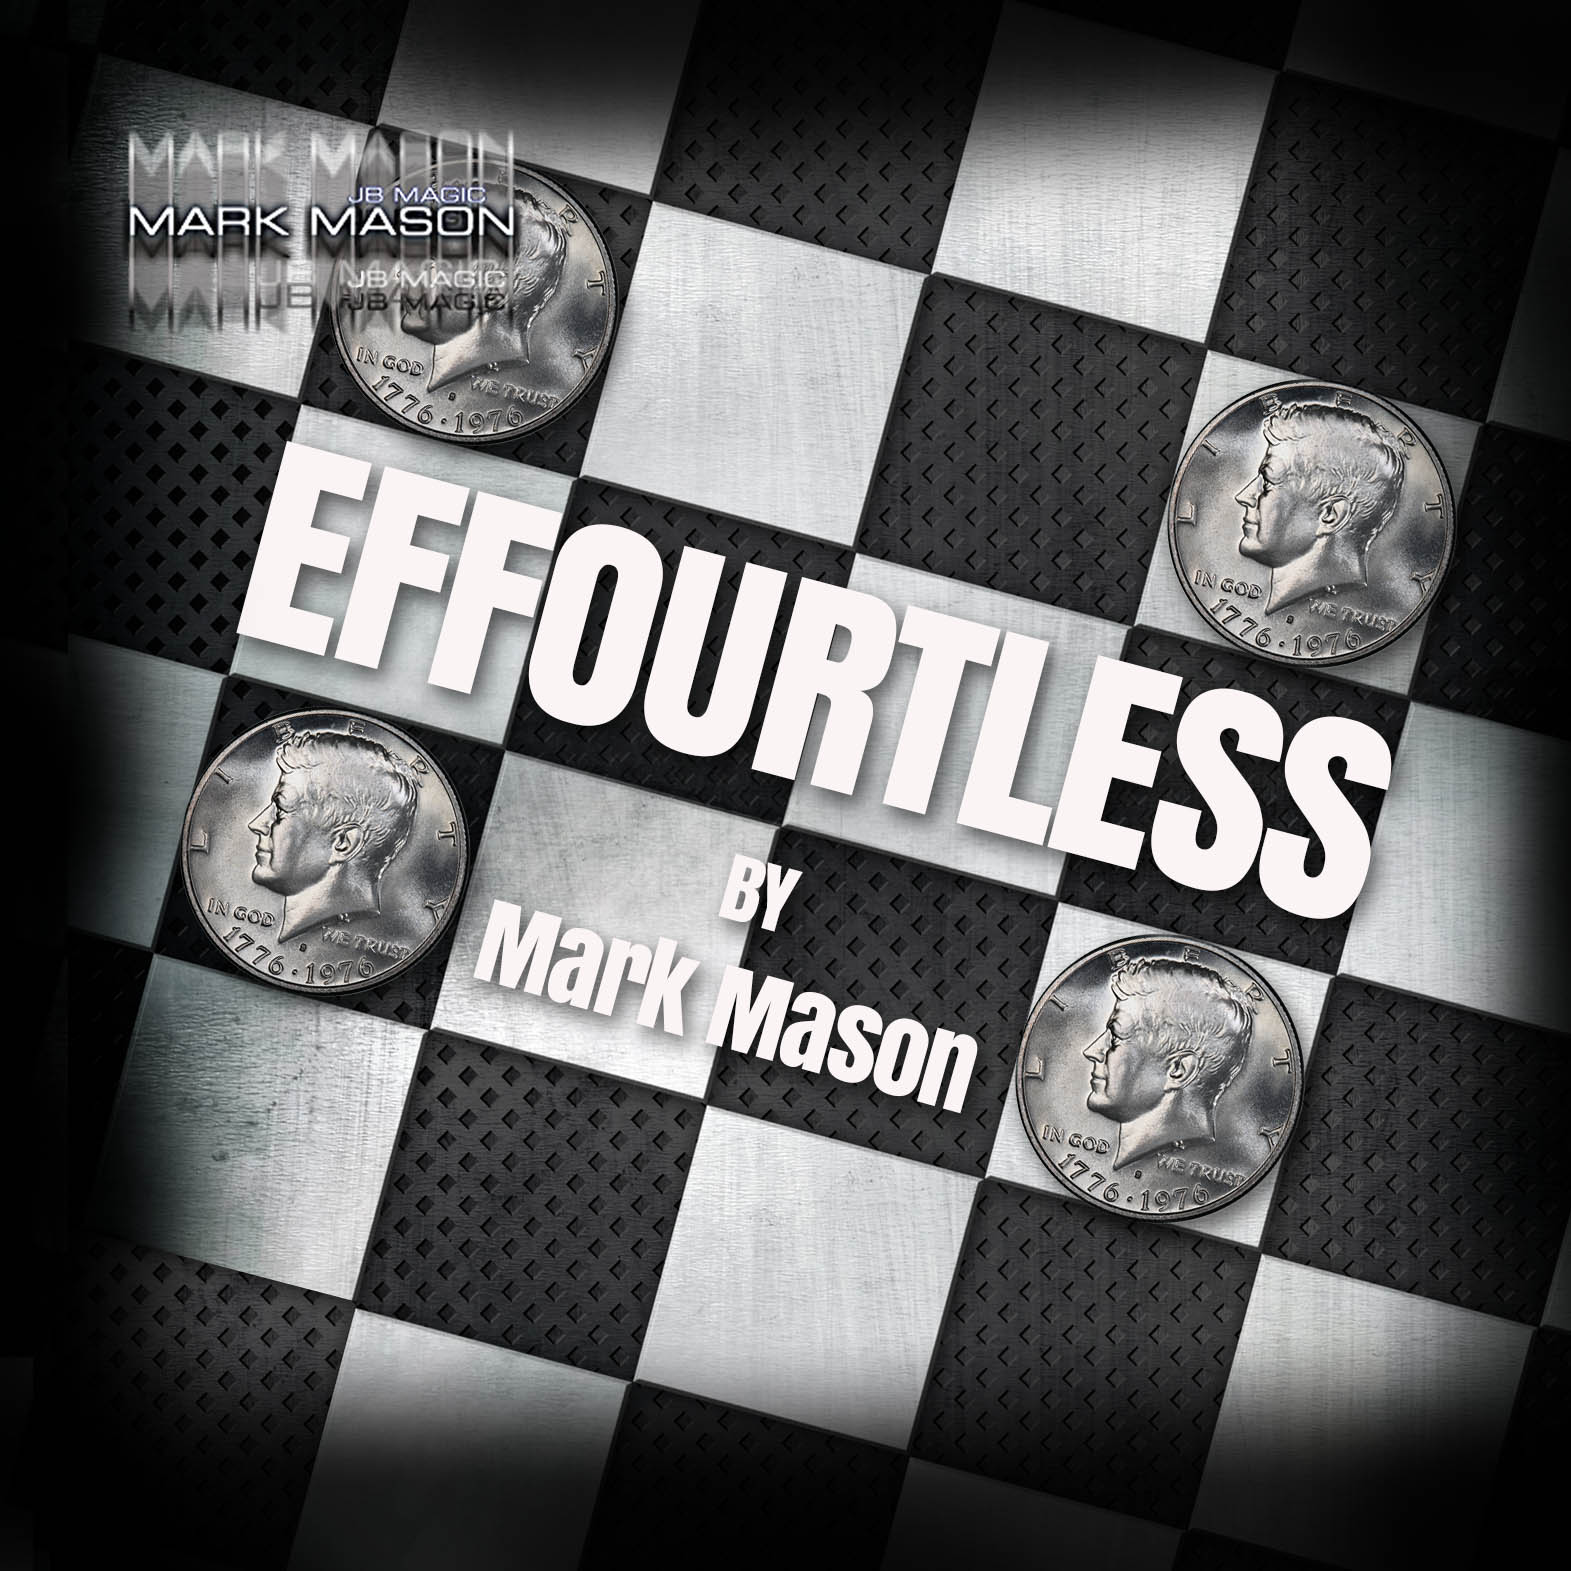 Effourtless by Mark Mason (Mp4 Video Magic Download 720p High Quality)